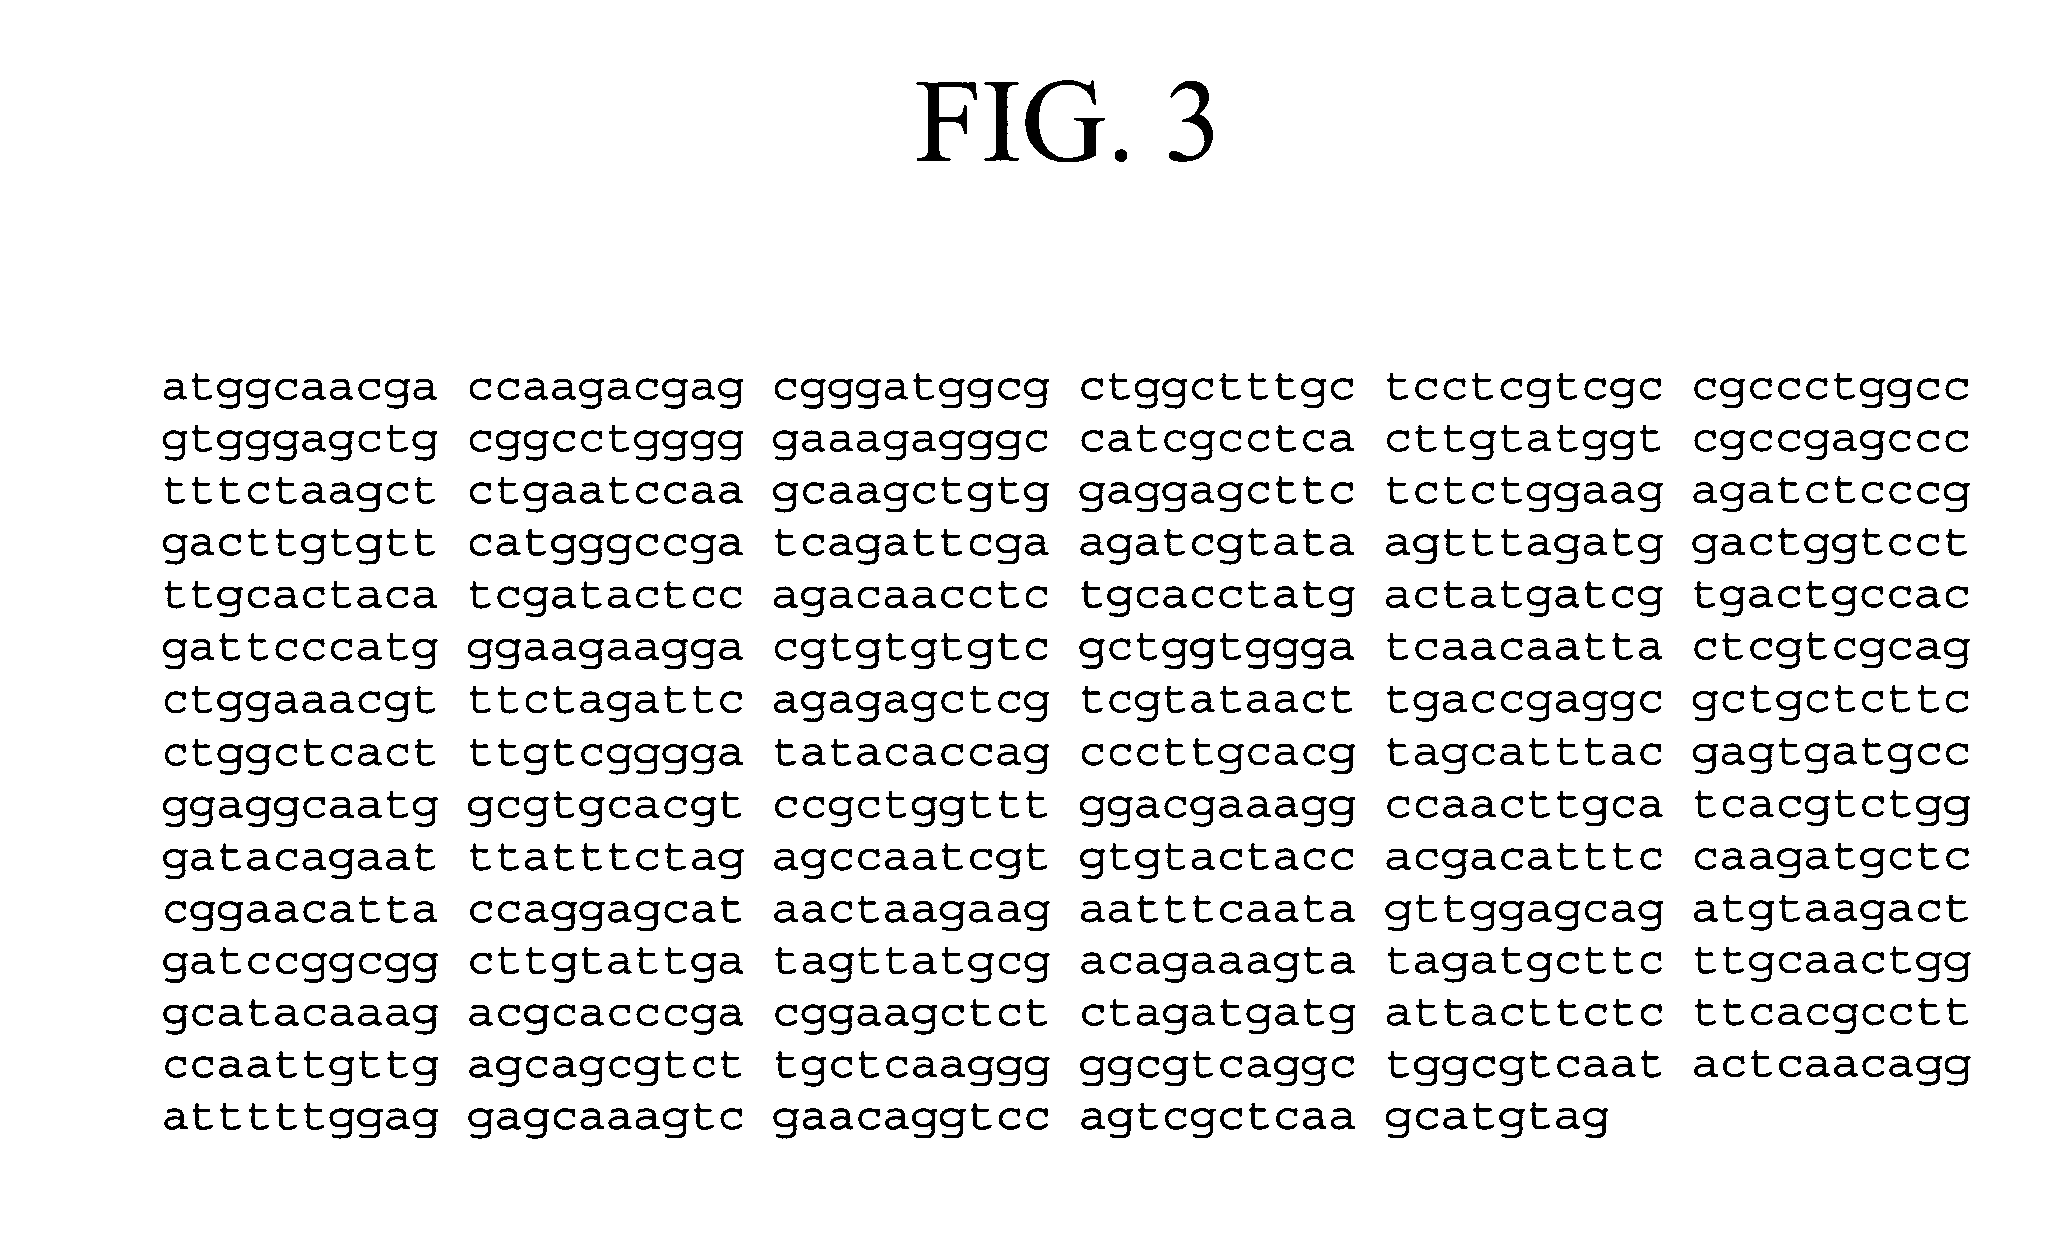 Polynucleotide sequence variants